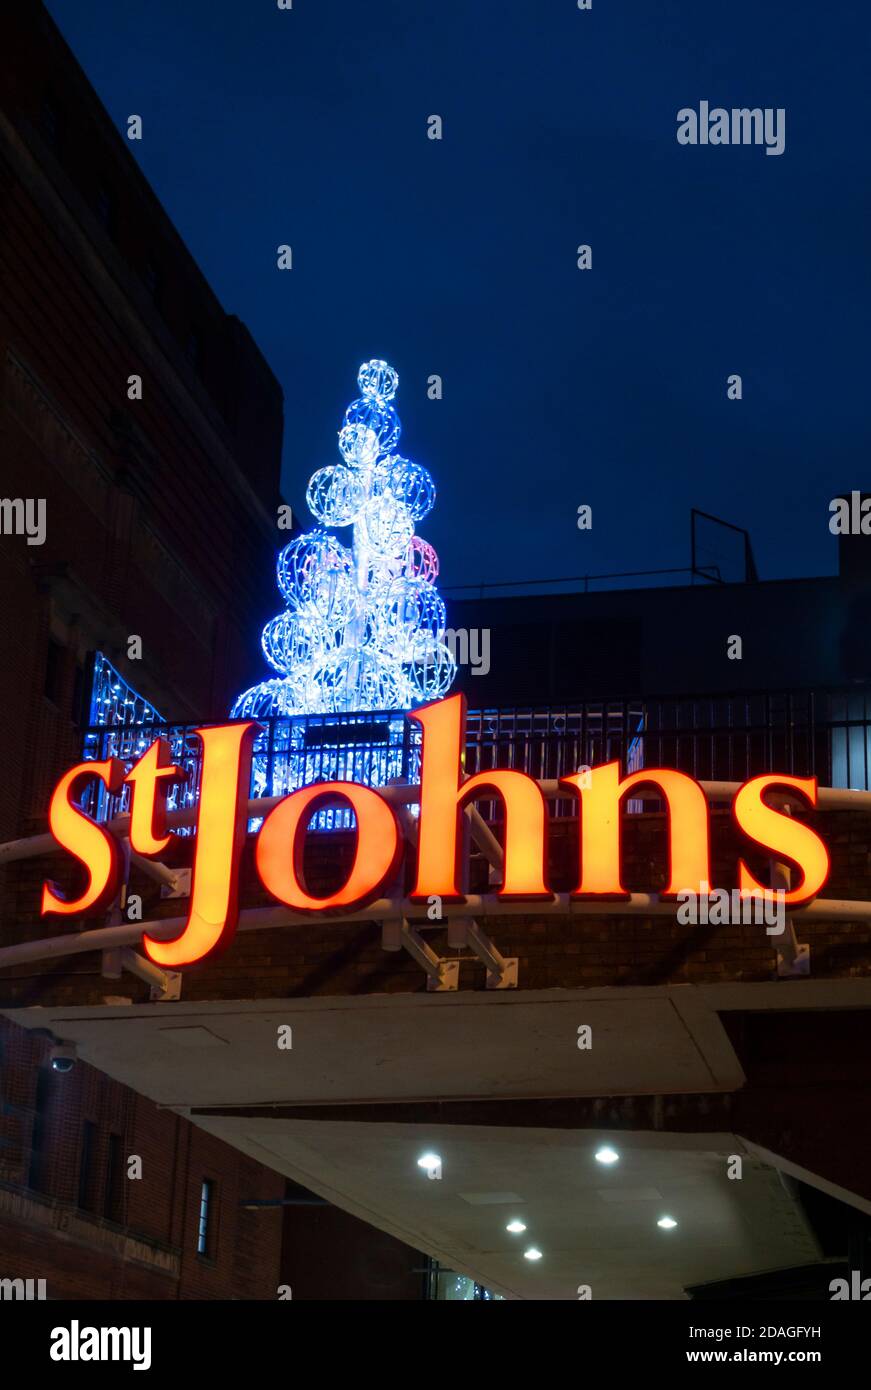 St. John's shopping centre entrance in Liverpool Stock Photo